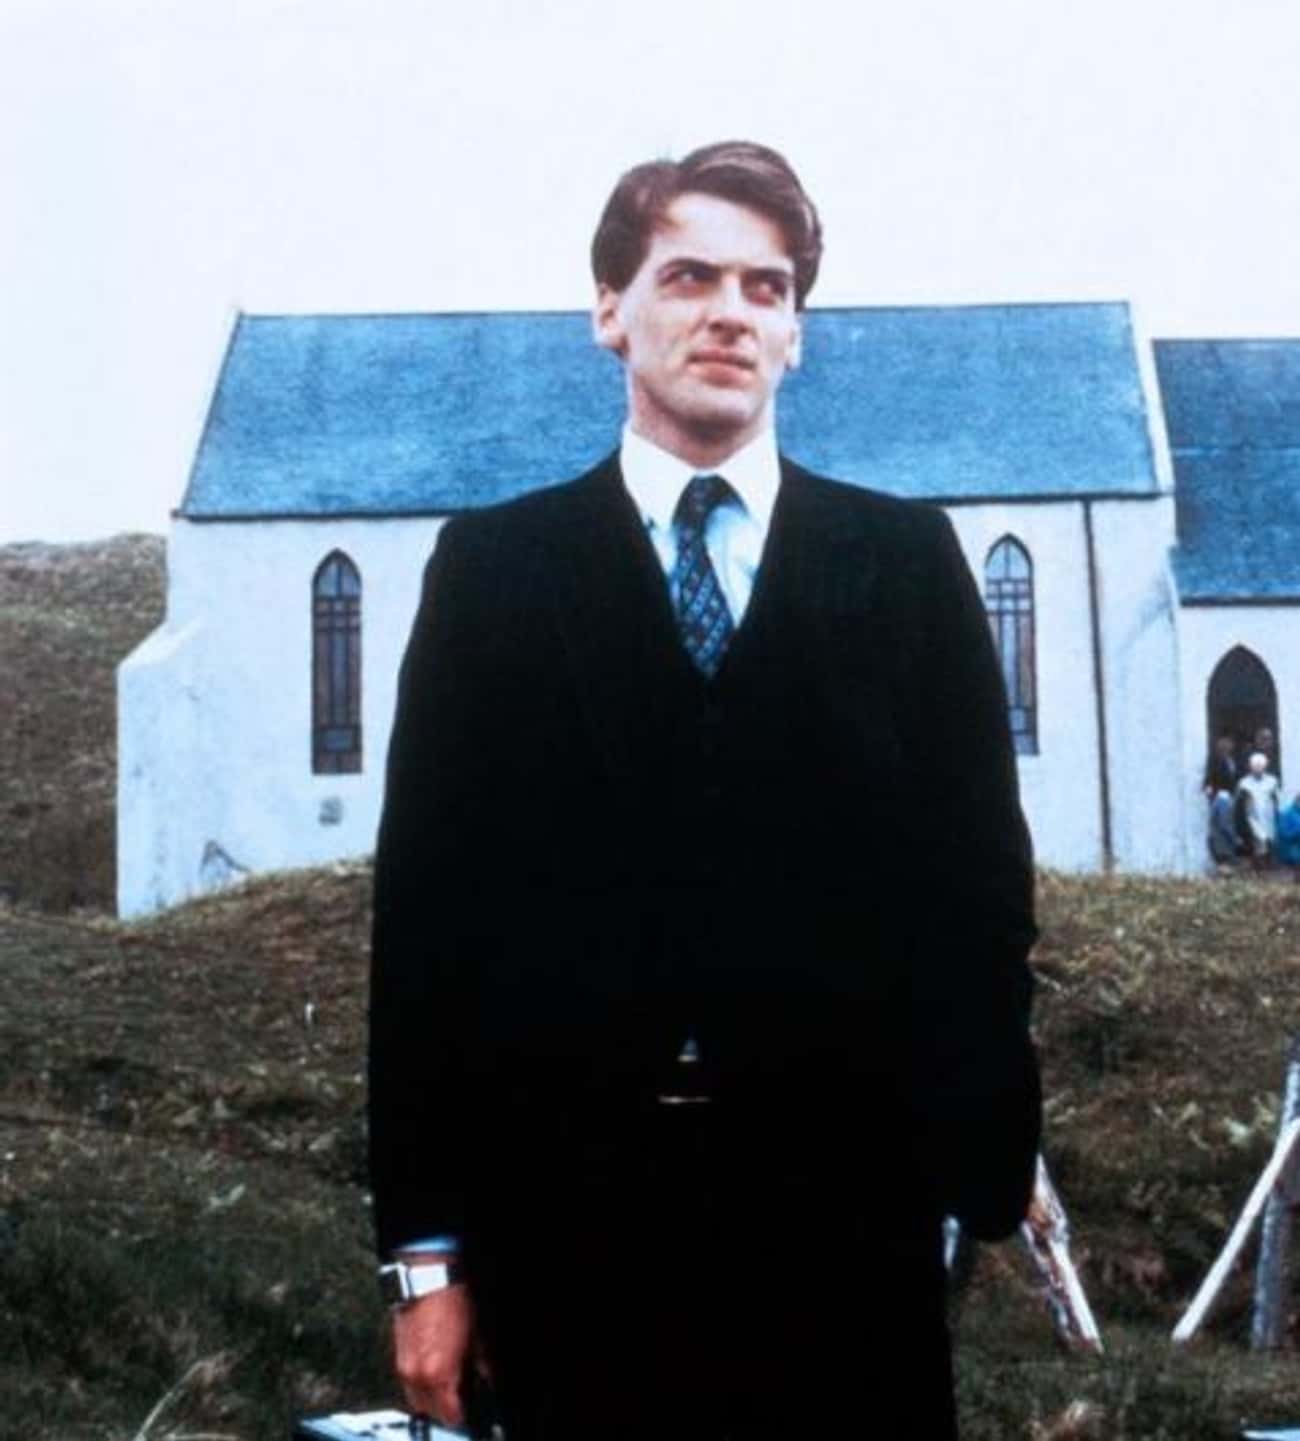 Young Peter Capaldi in Black Suit with Blue Tie